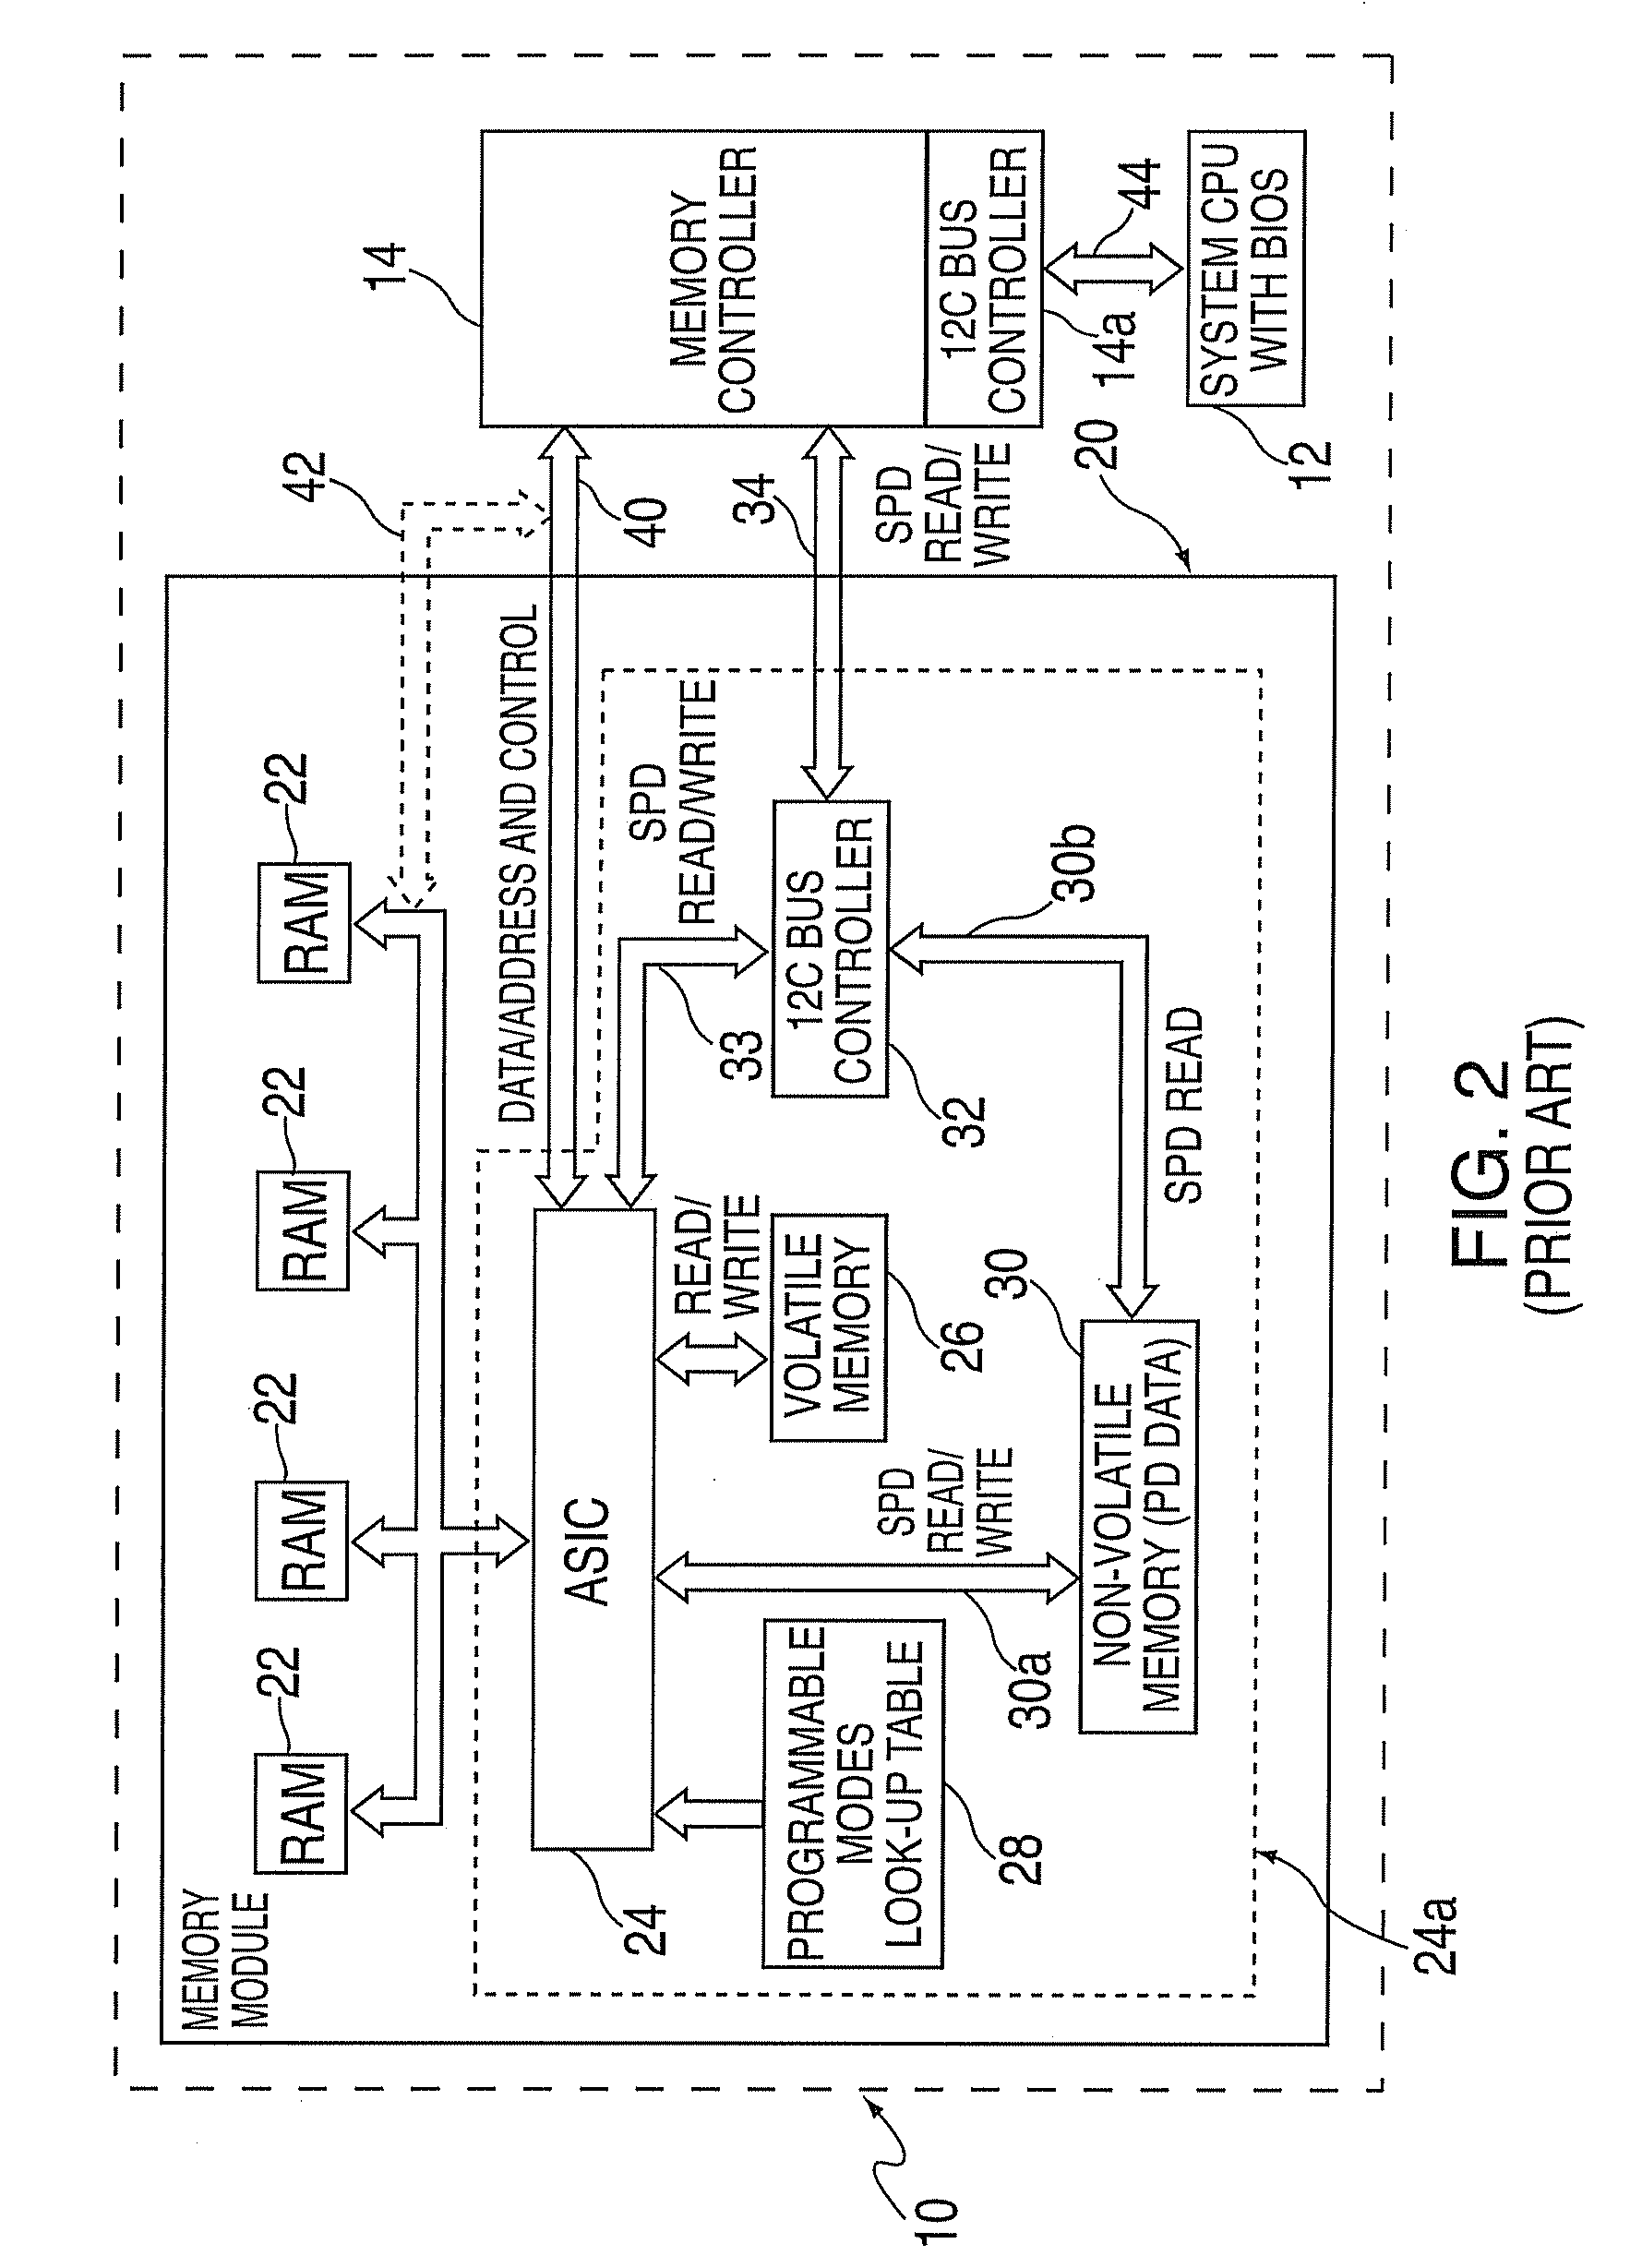 Systems and methods for providing performance monitoring in a memory system